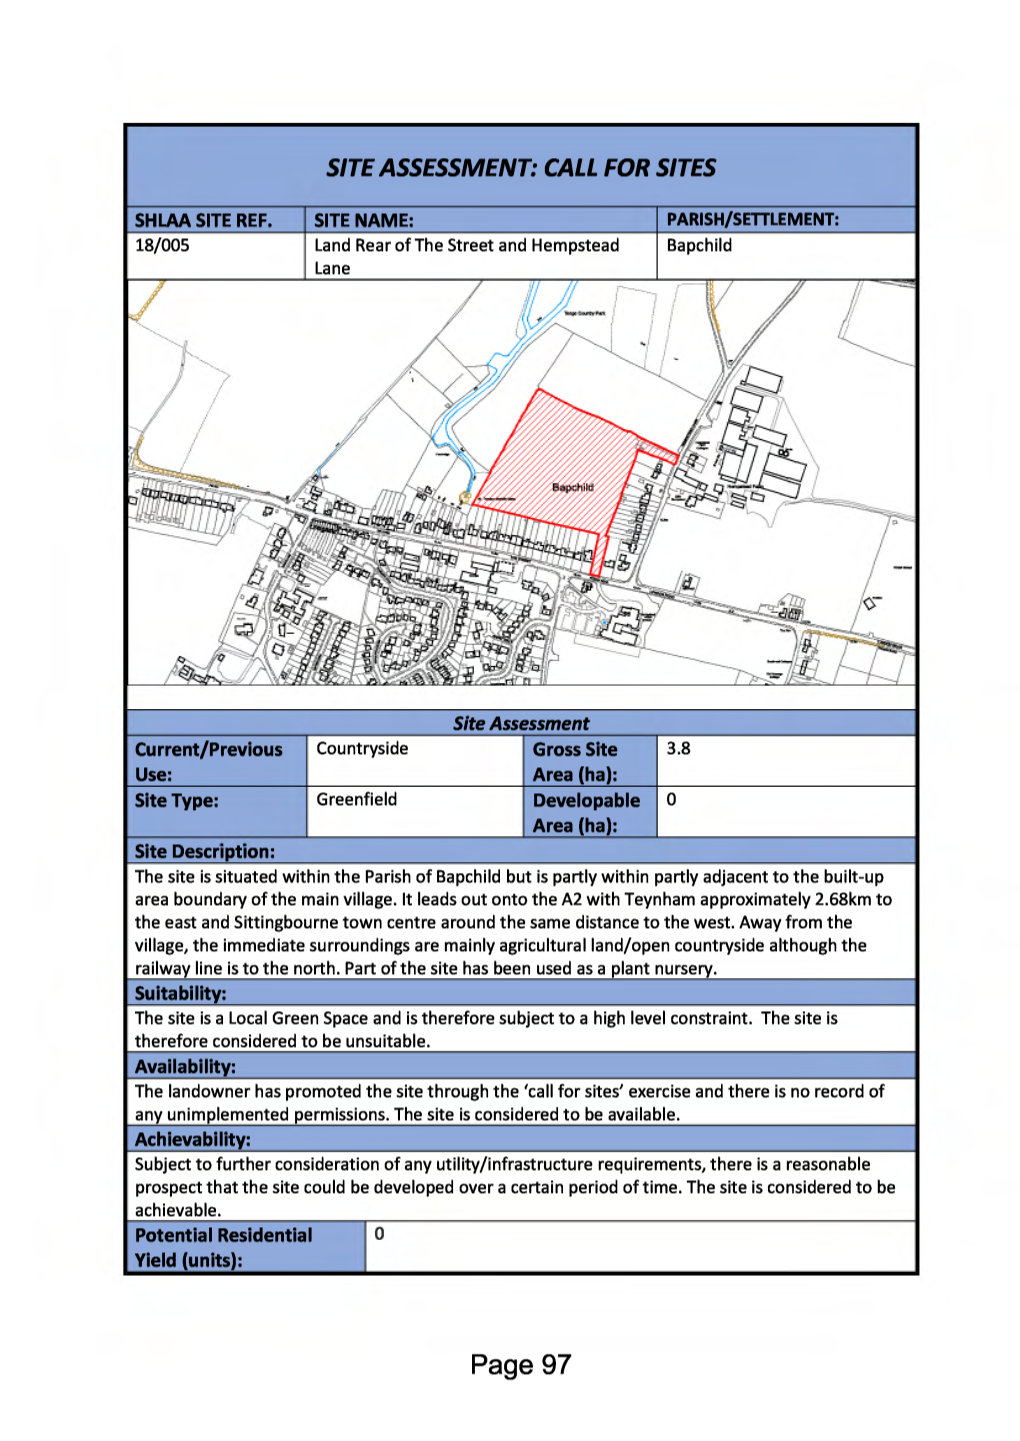 SITE ASSESSMENT: CALL for SITES Page 97